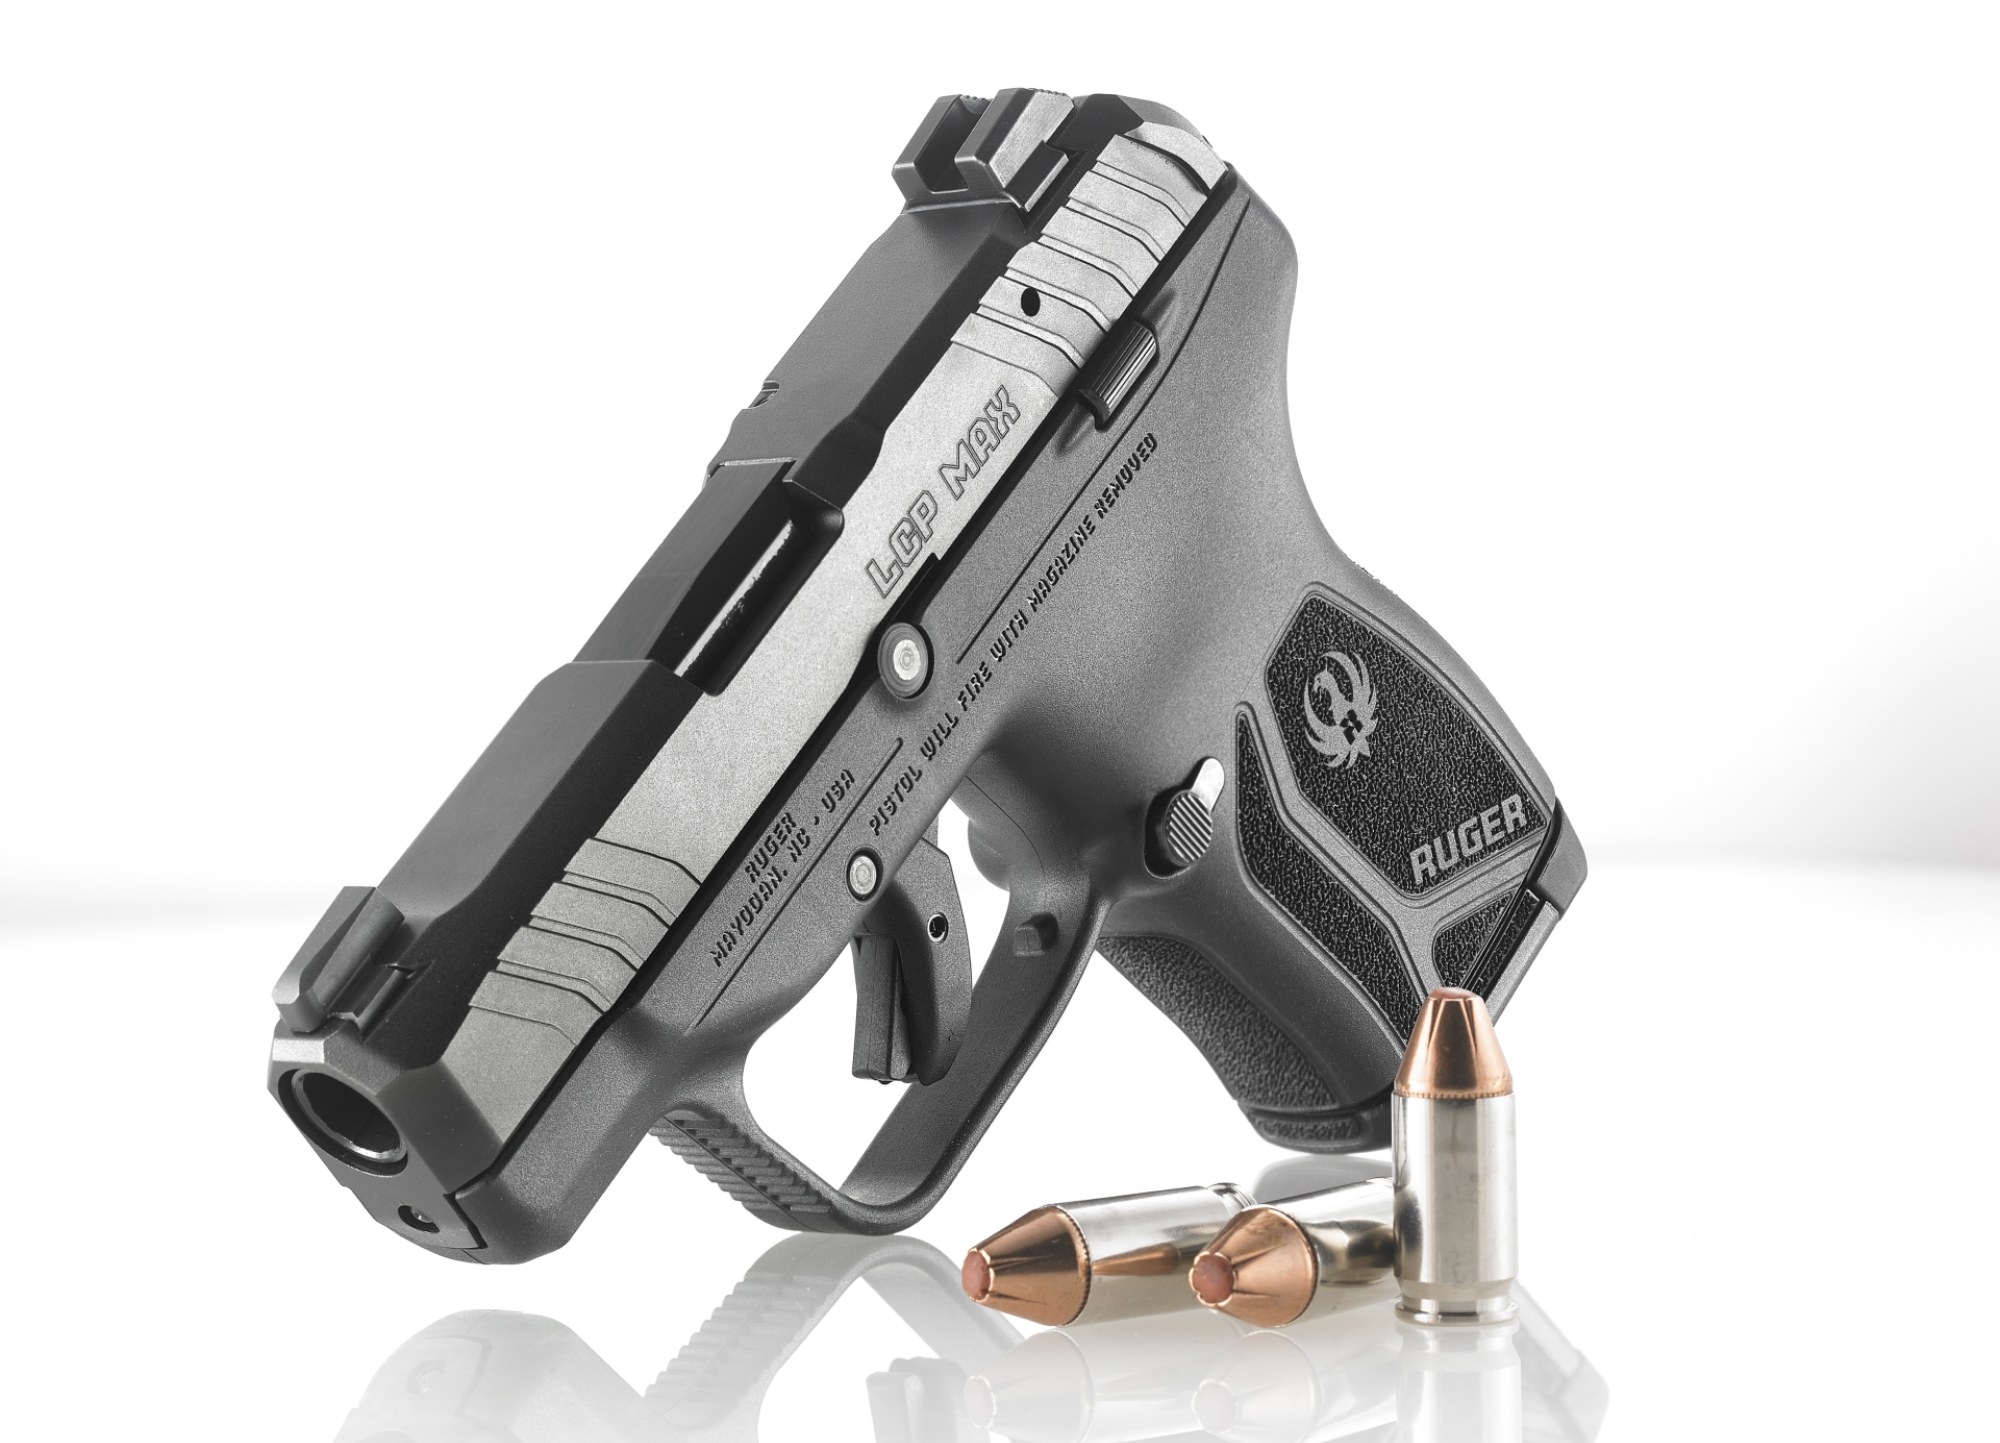 The New Ruger Lcp Max Pistol All4shooters